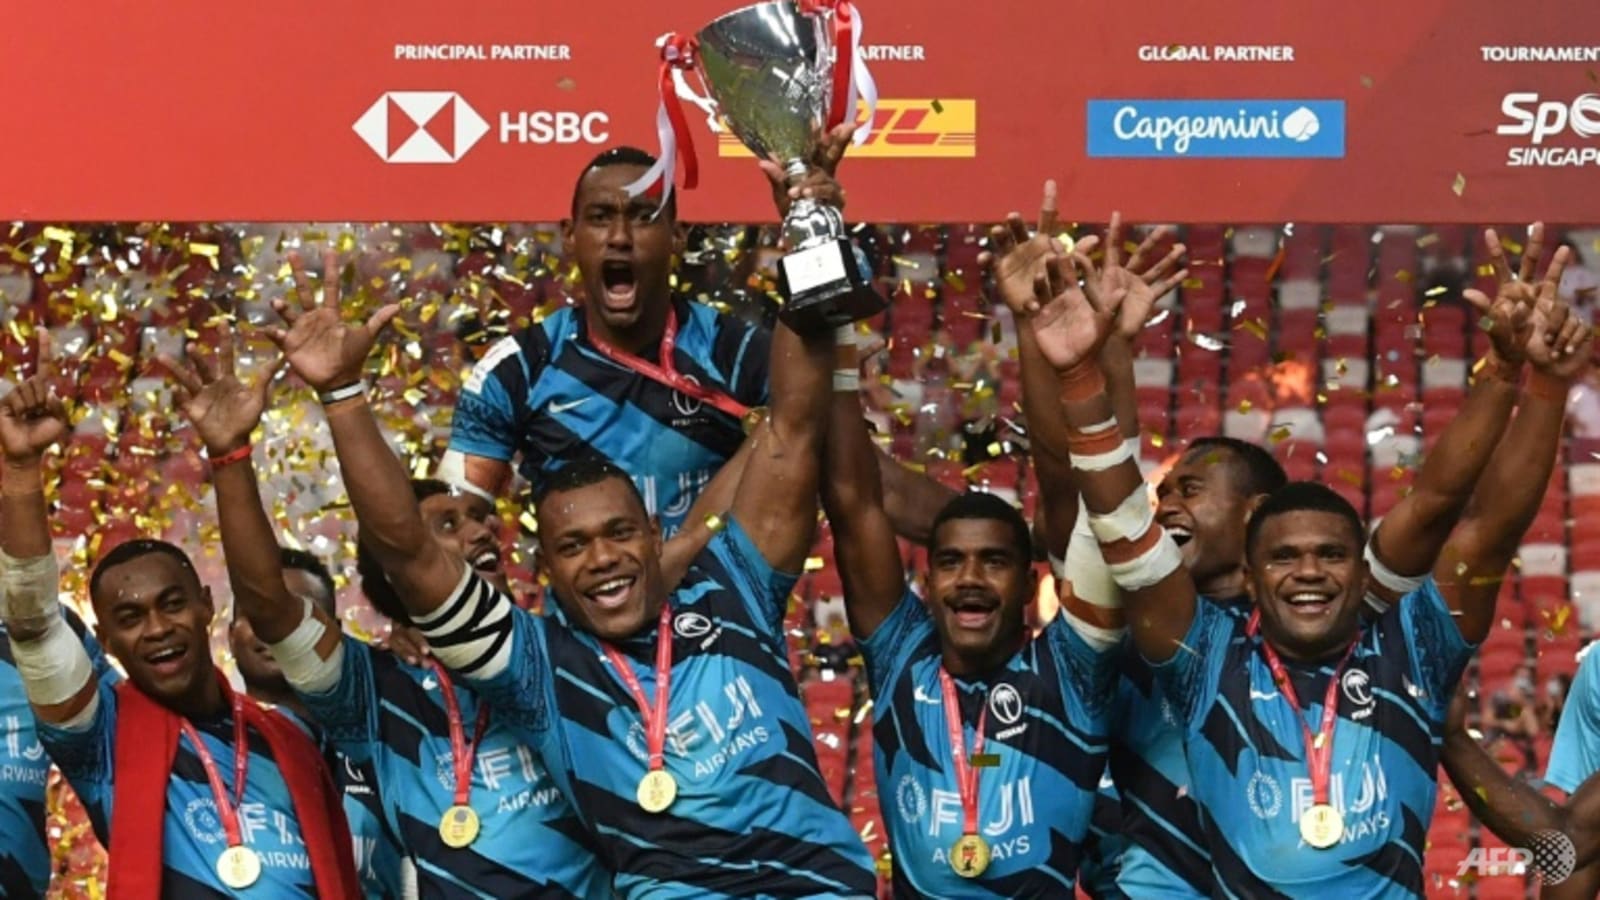 fiji-overpower-new-zealand-to-win-singapore-rugby-sevens